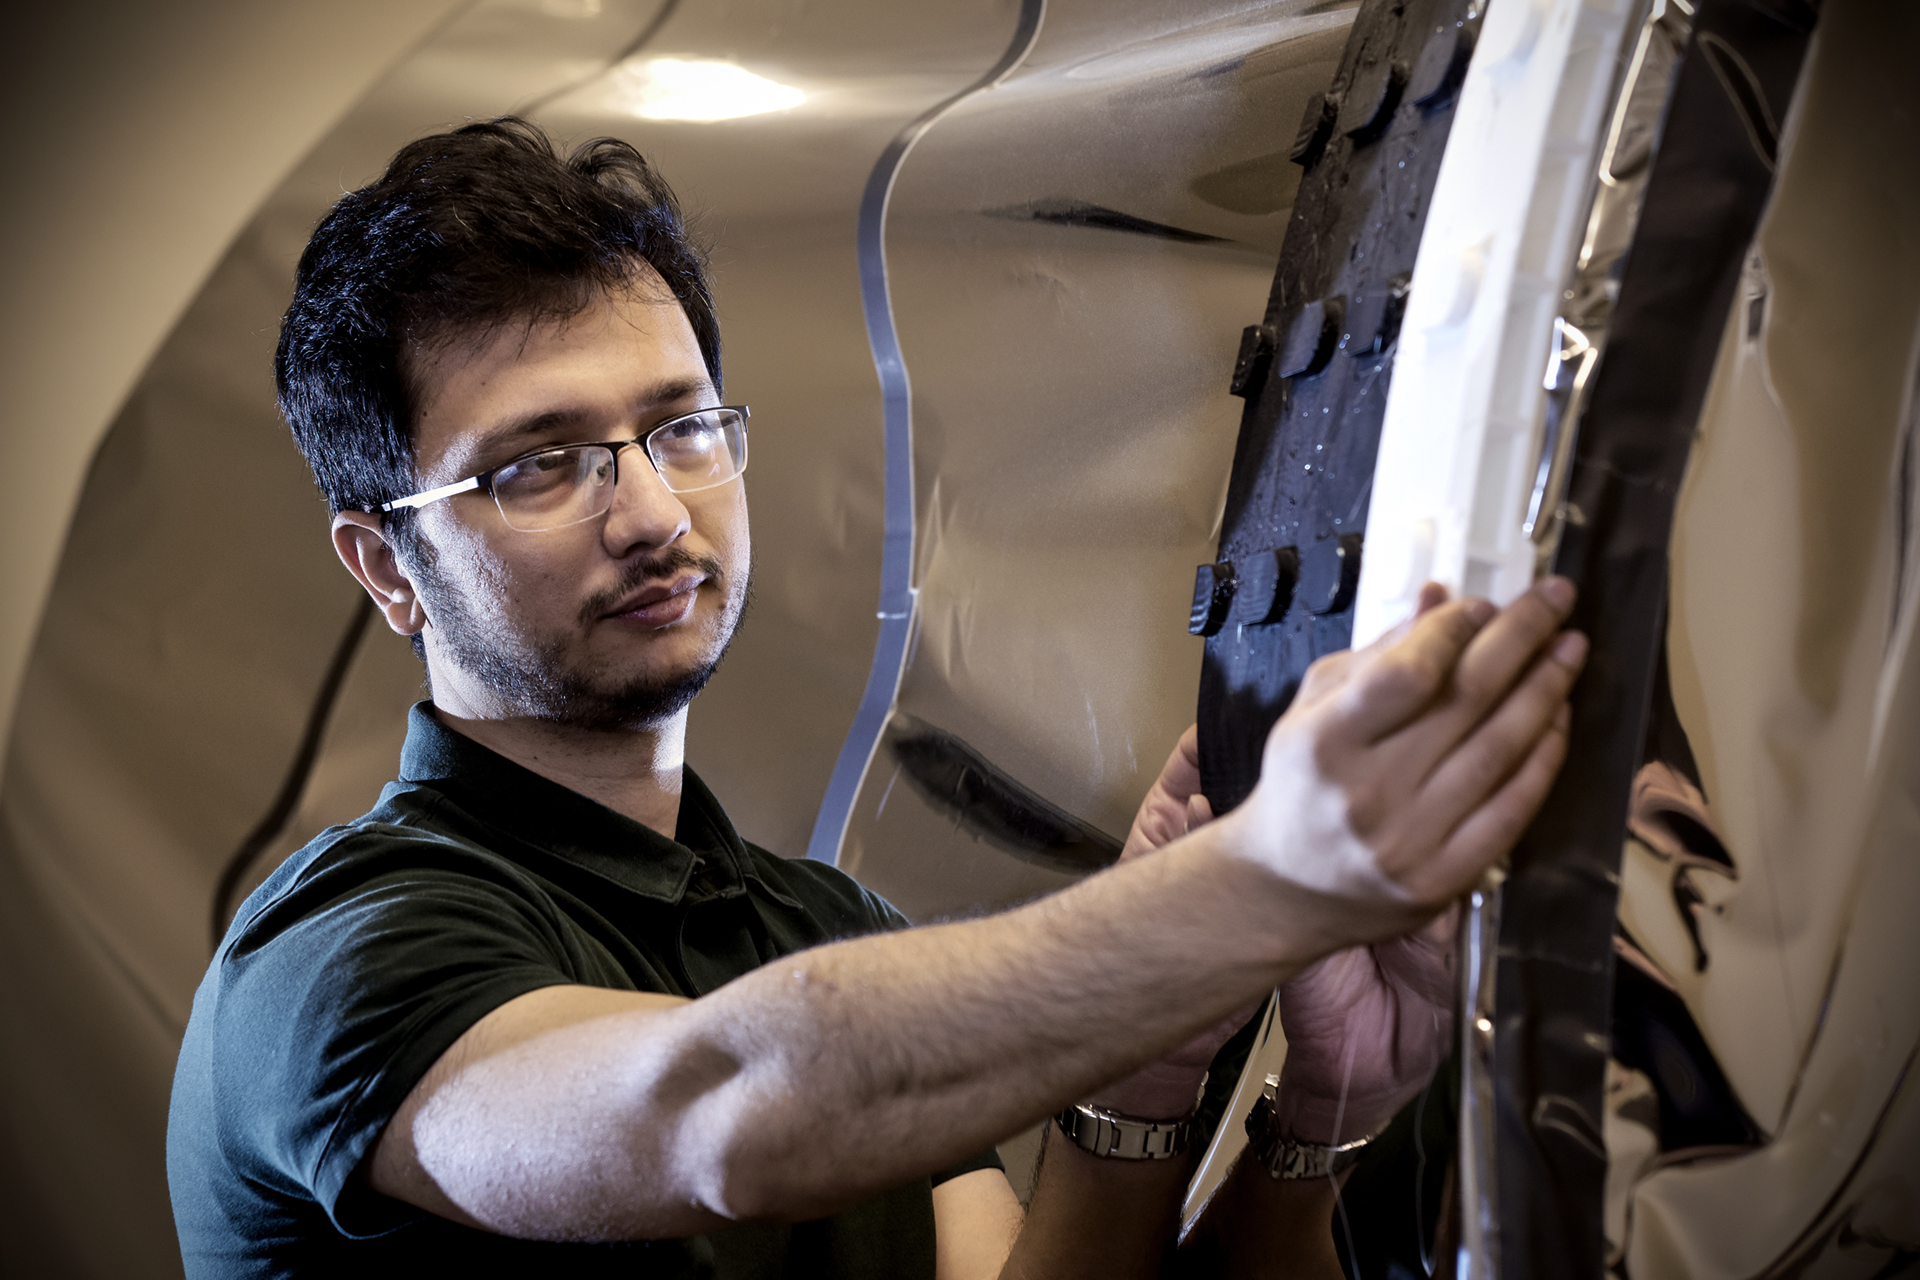 Anwit Adhikari fitting an endoskeleton he designed using a 3D printer onto the mock-up airlock. (Photo by Trevor Hopkin)